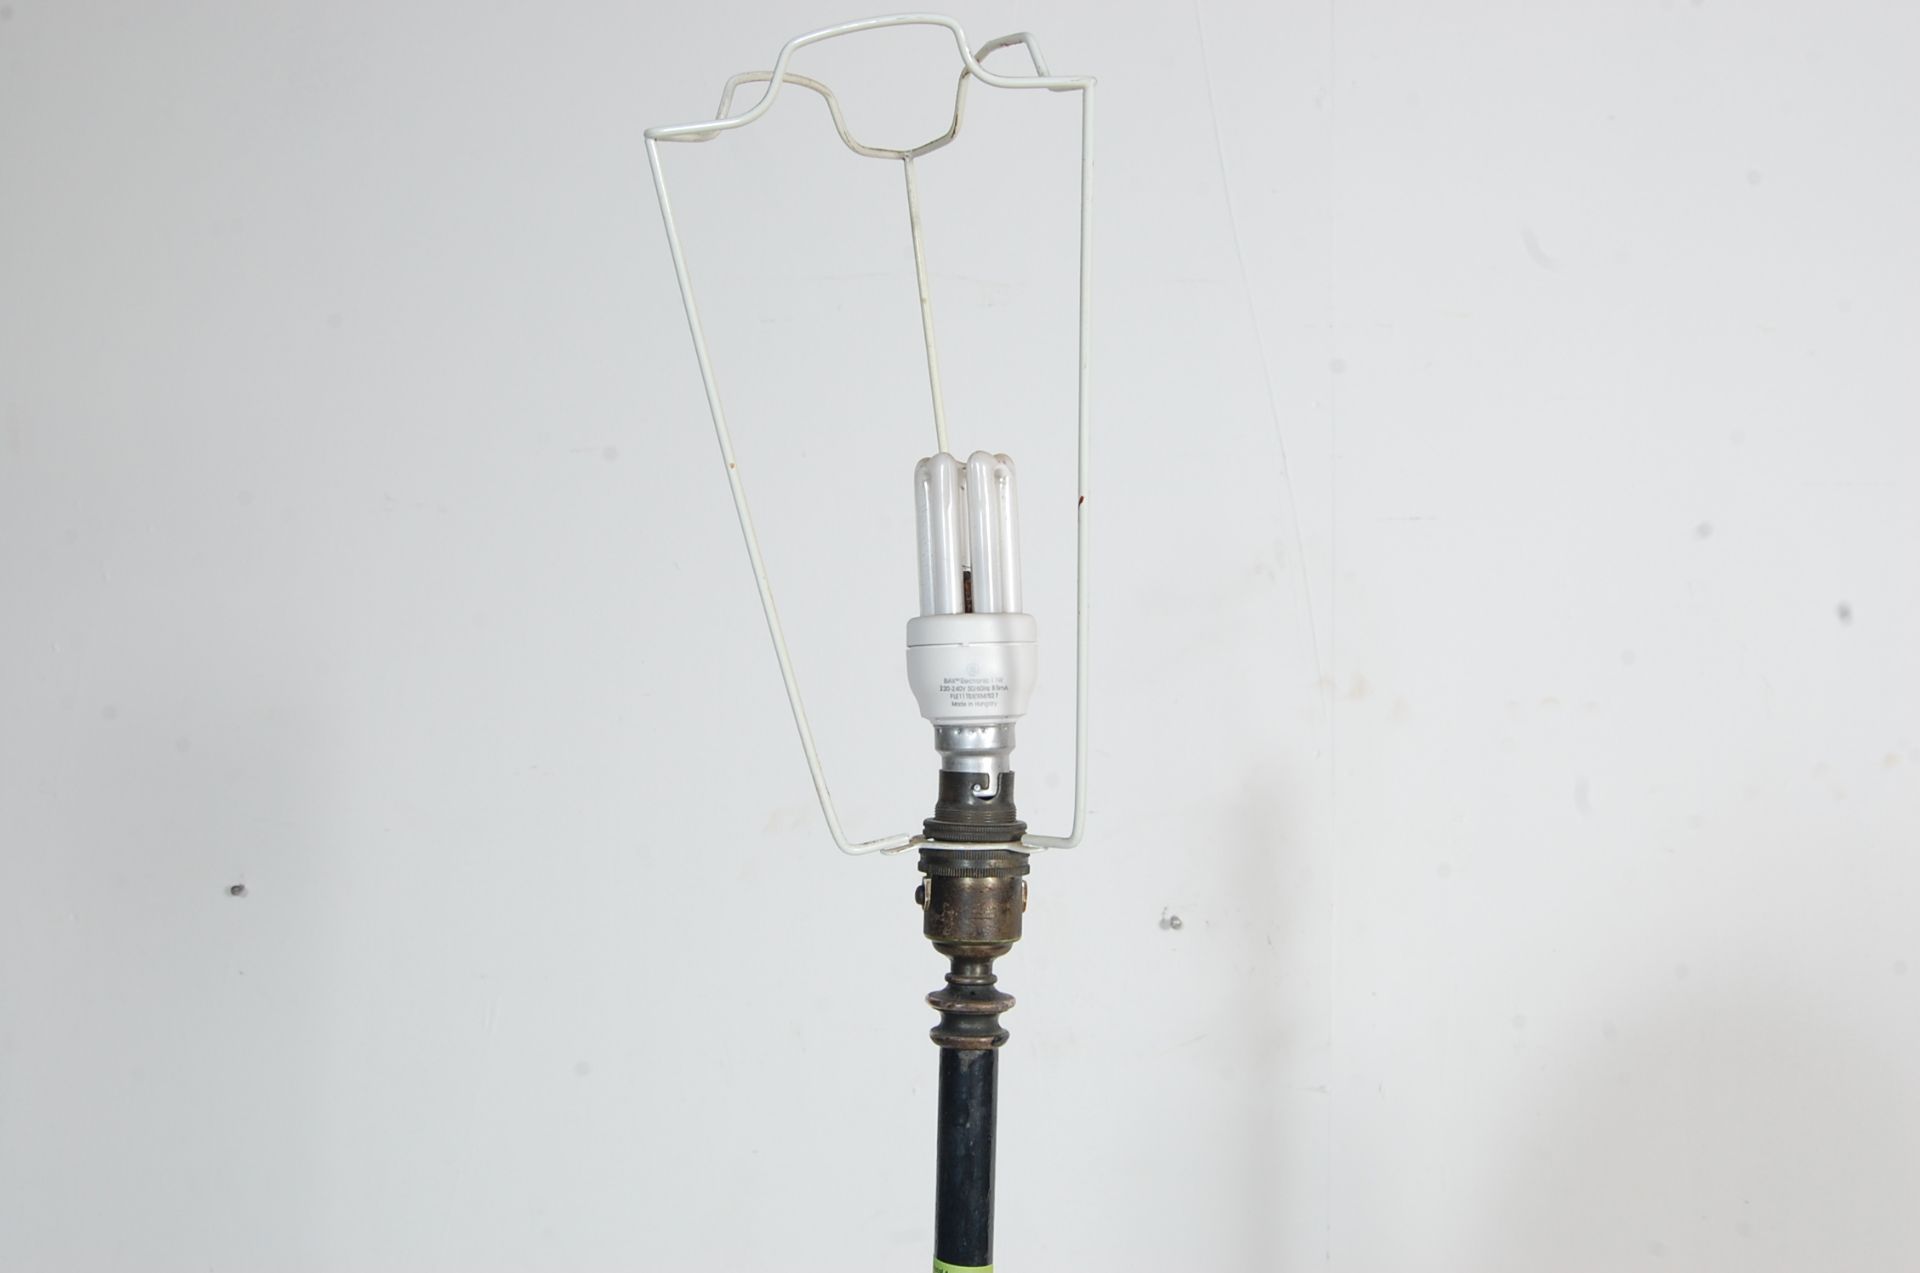 TWO EARLY 20TH CENTURY STANDARD LAMPS - Image 5 of 7